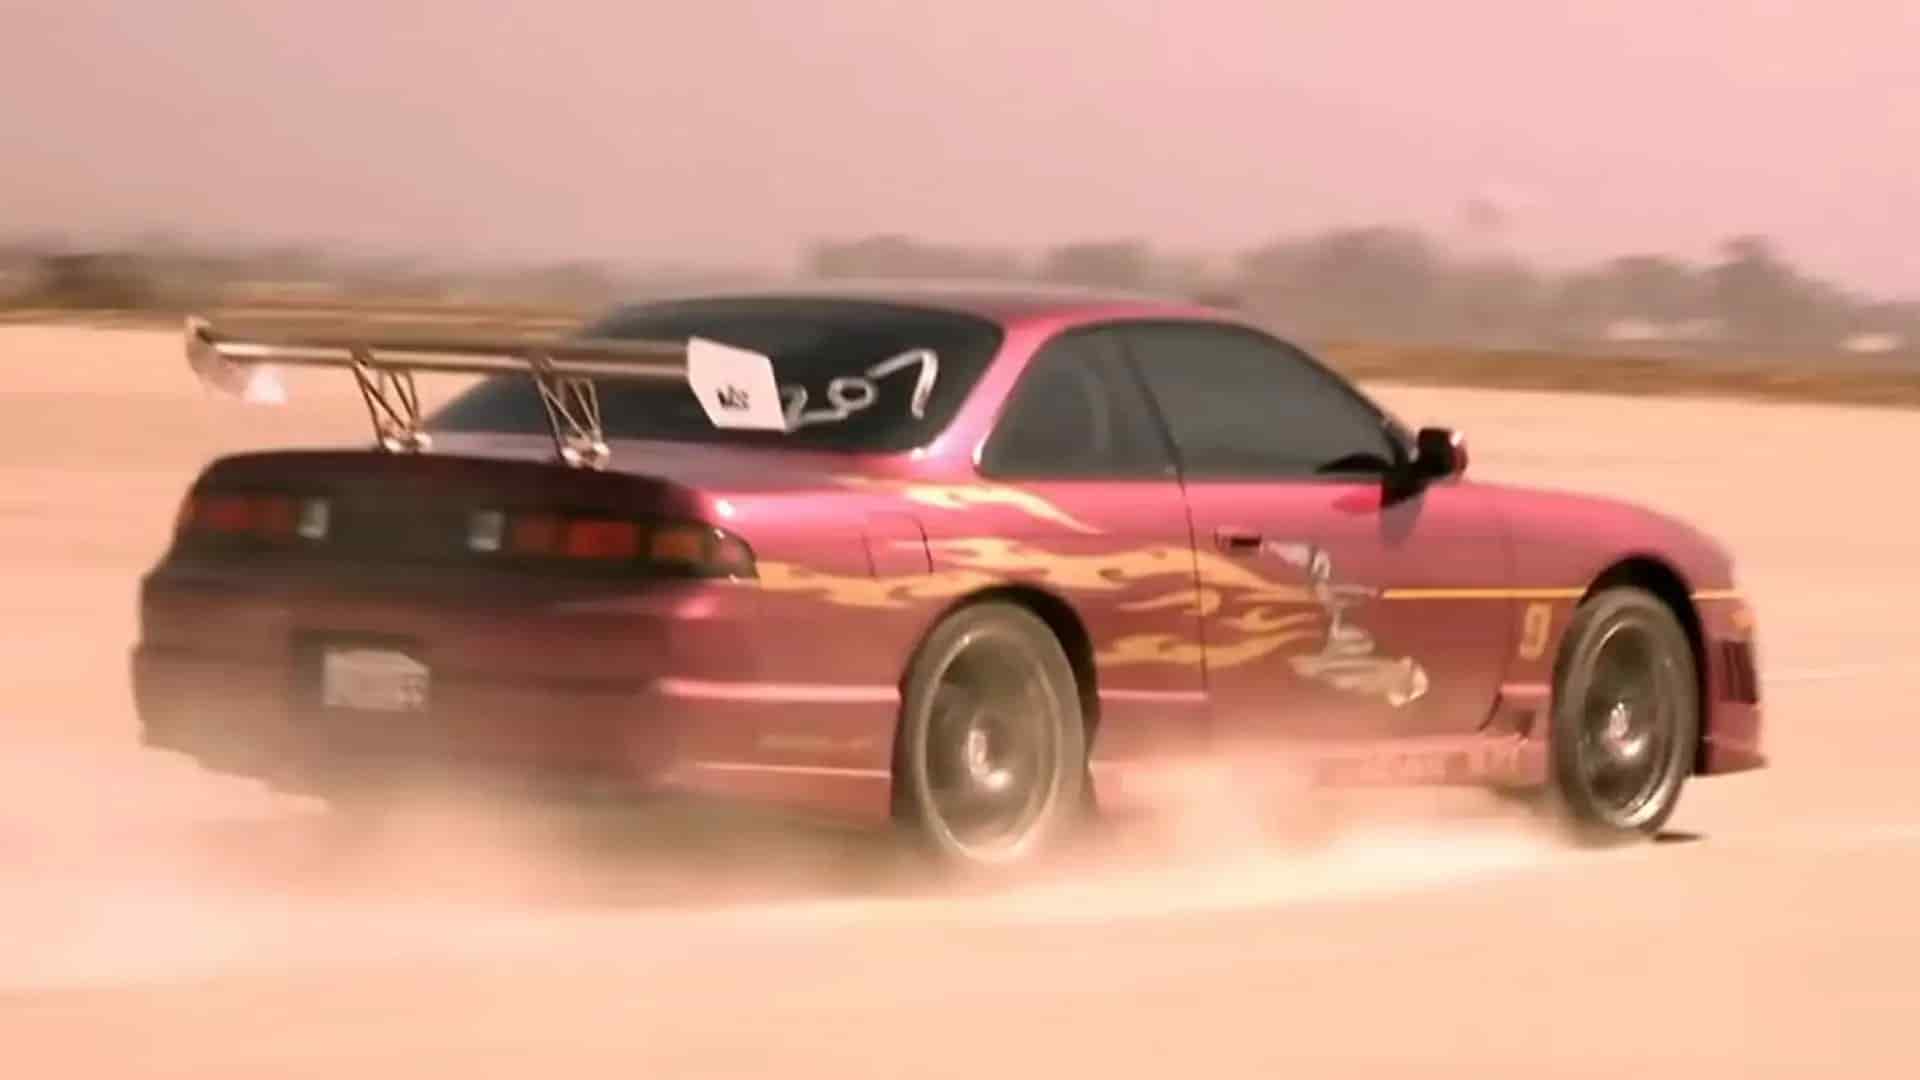 letty nissan 240sx fast and furious